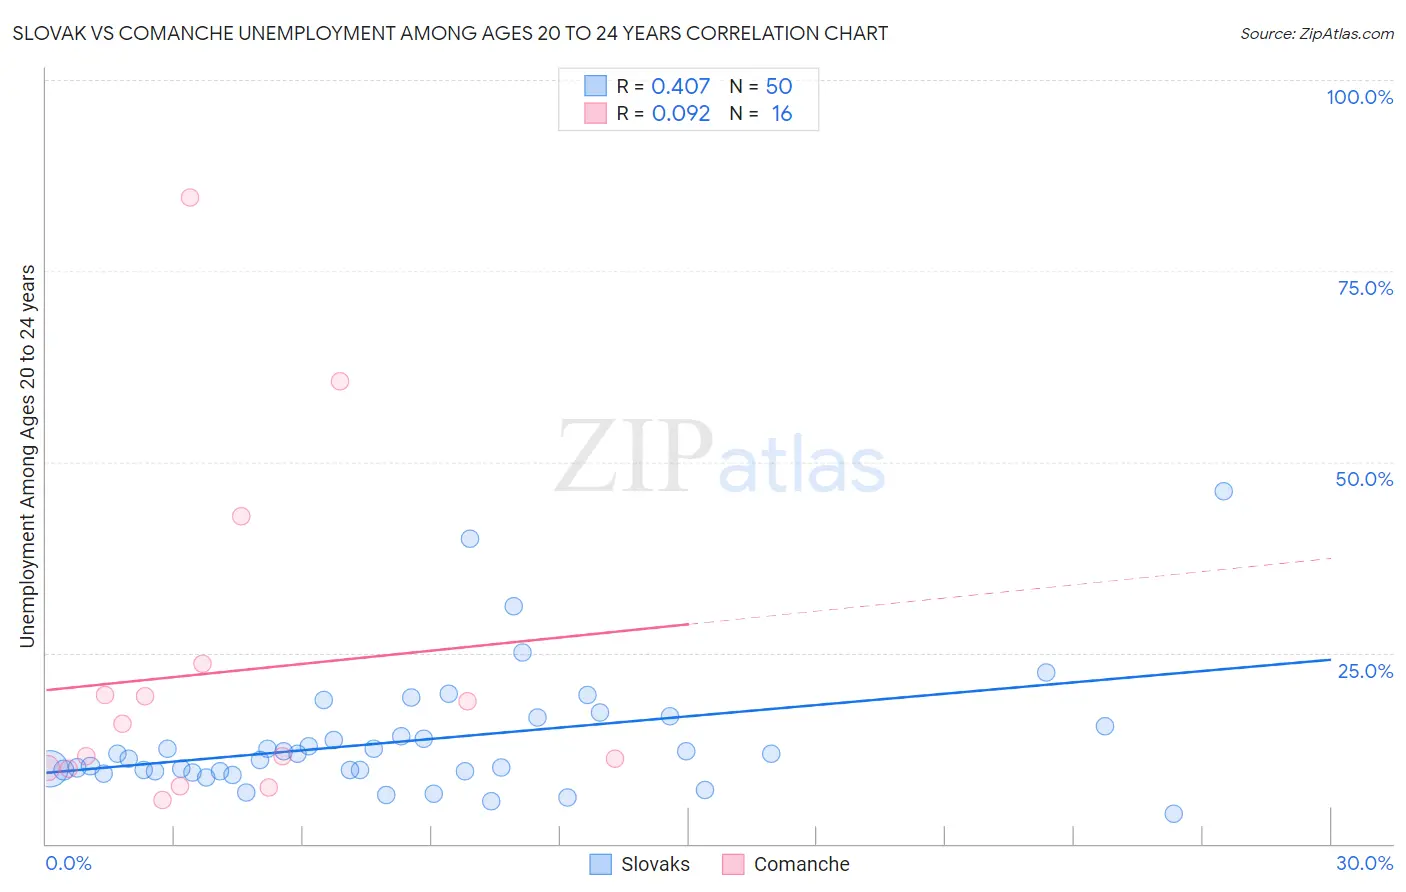 Slovak vs Comanche Unemployment Among Ages 20 to 24 years